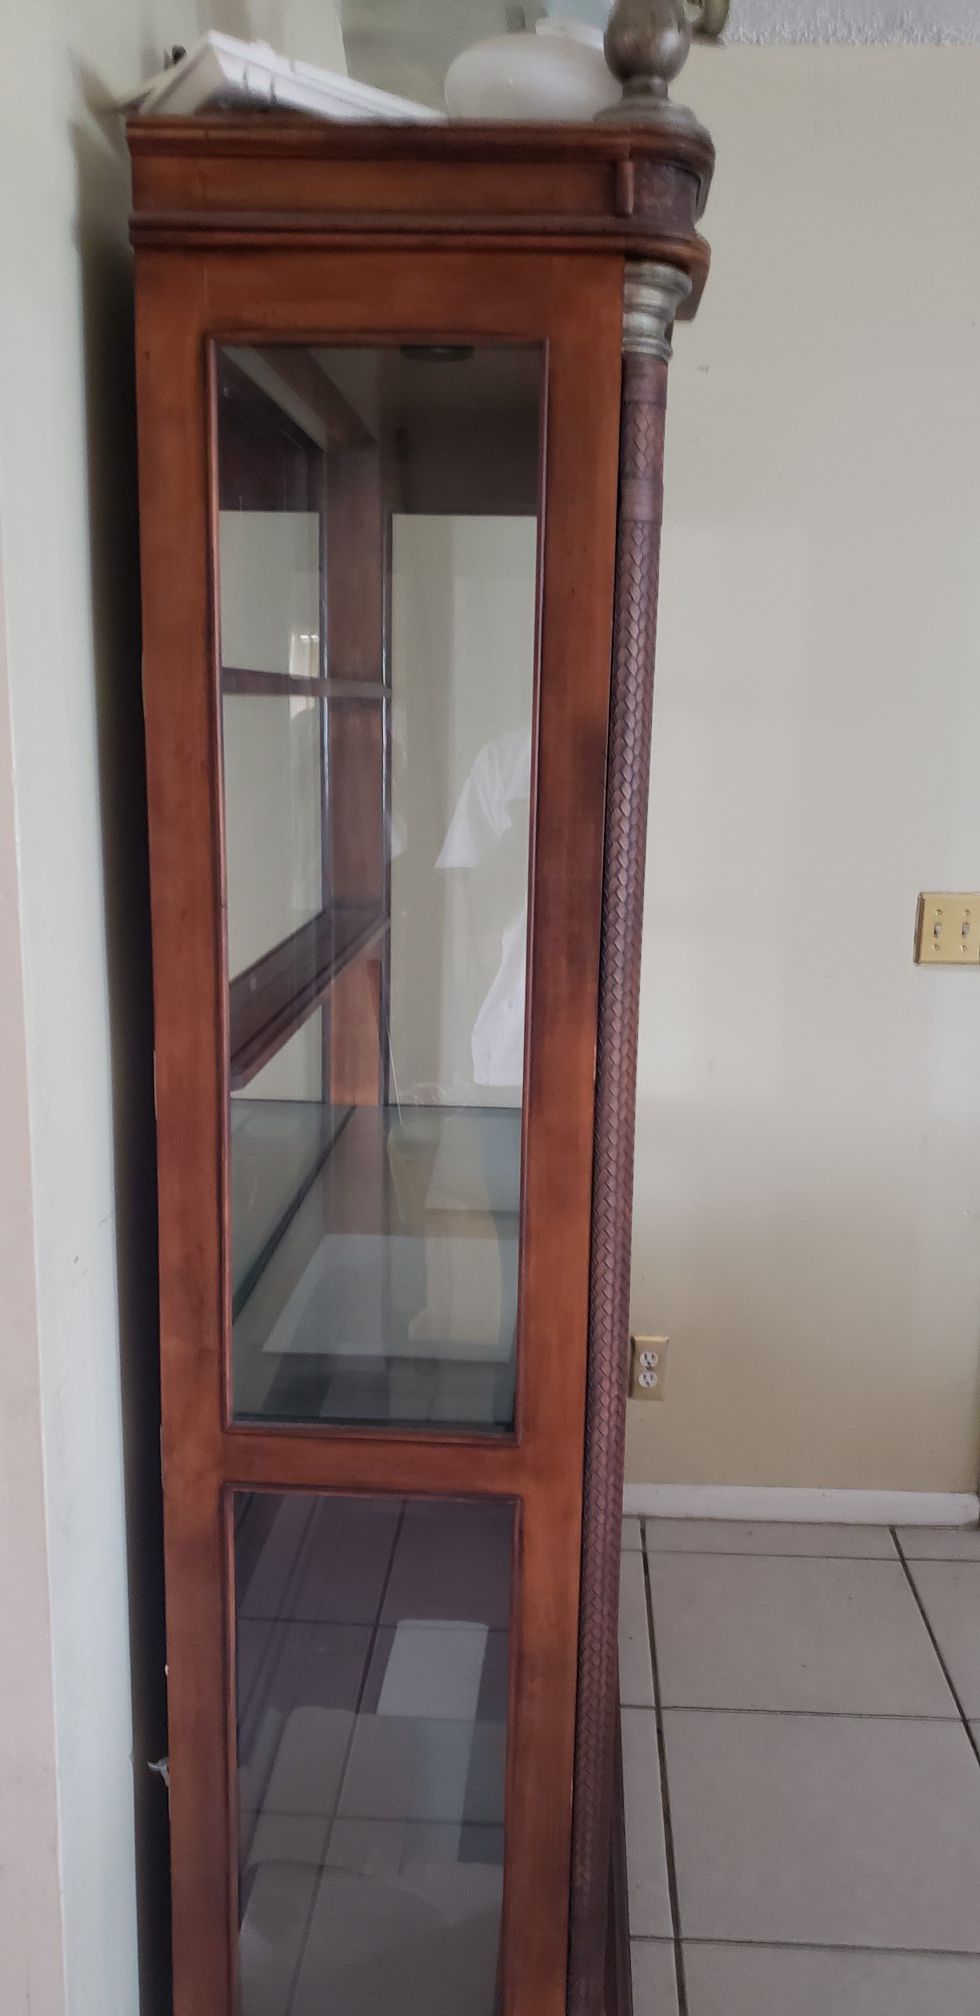 Kuliwood and leather curio cabinet